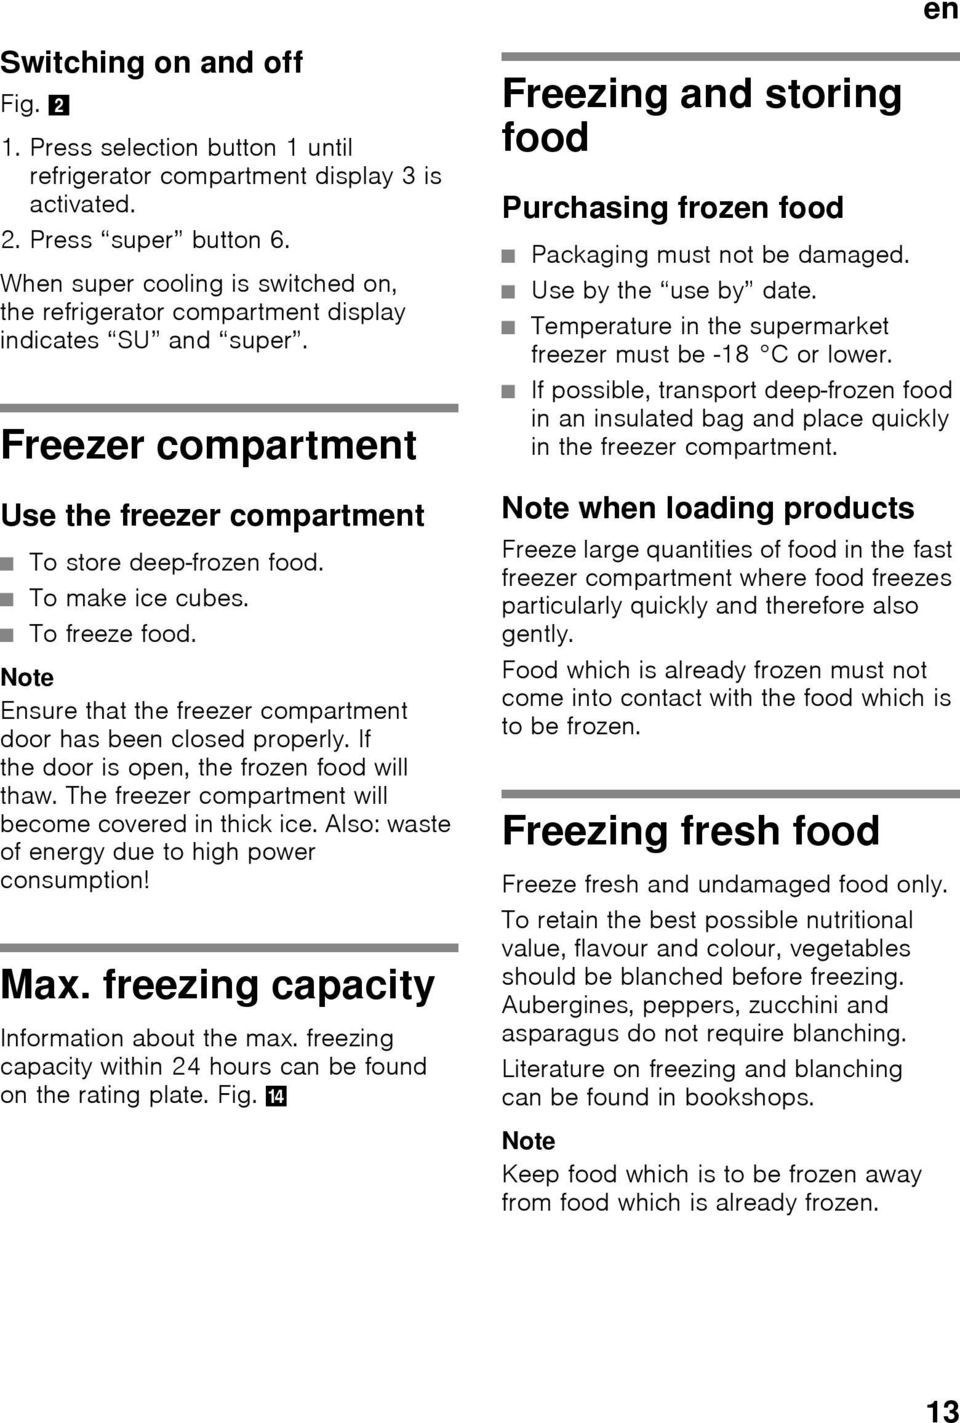 To freeze food. Note Ensure that the freezer compartment door has been closed properly. If the door is open, the frozen food will thaw. The freezer compartment will become covered in thick ice.